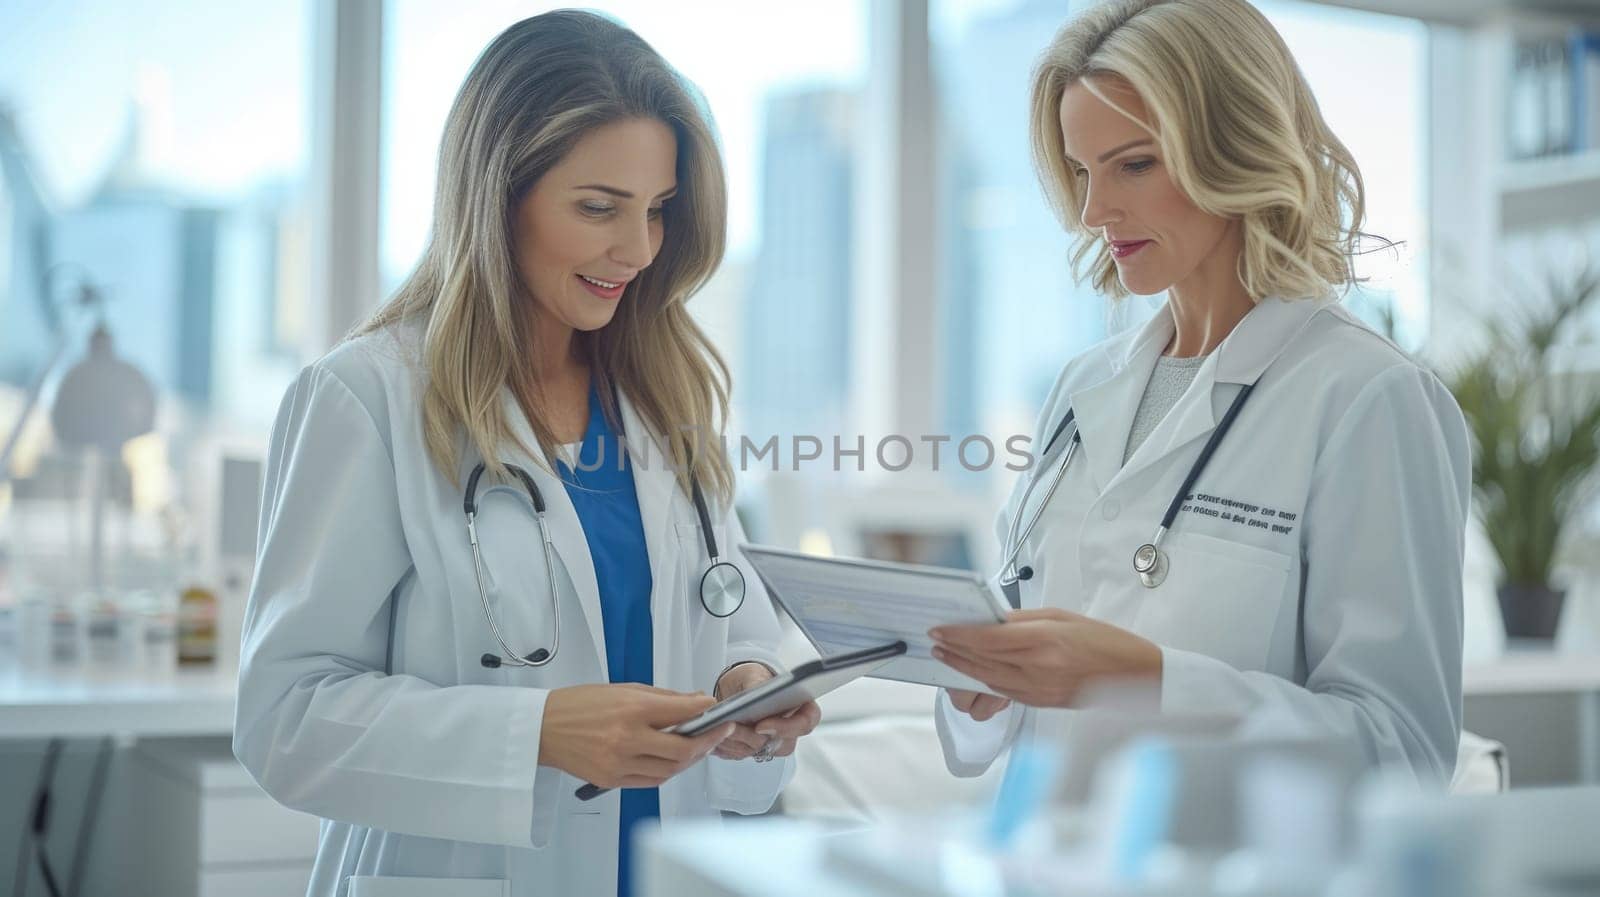 Two women wearing white lab coats are examining a tablet together.